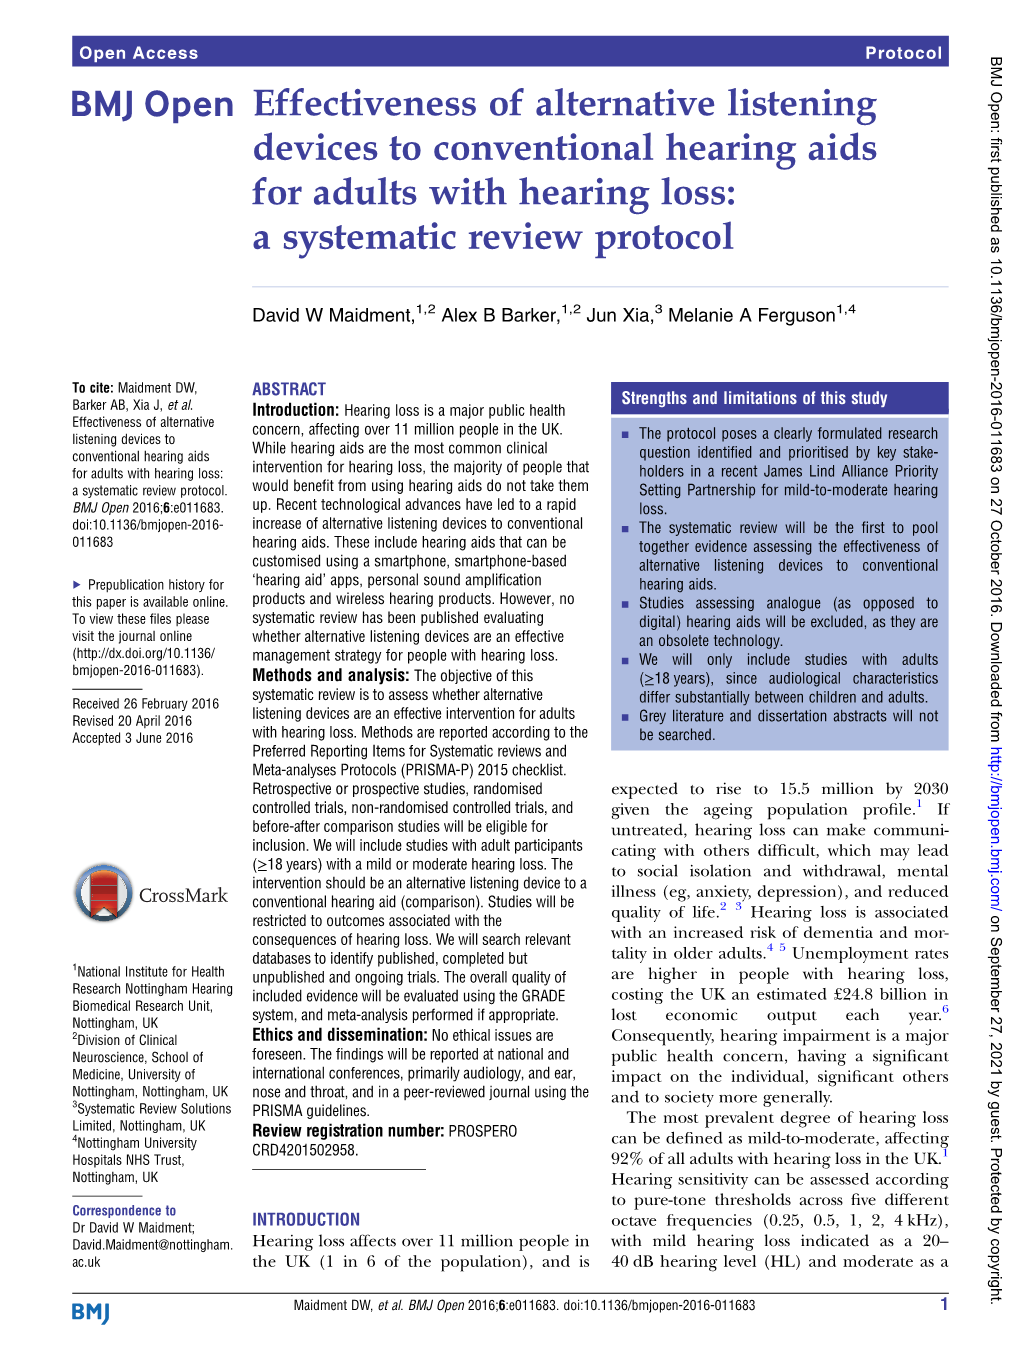 Effectiveness of Alternative Listening Devices to Conventional Hearing Aids for Adults with Hearing Loss: a Systematic Review Protocol